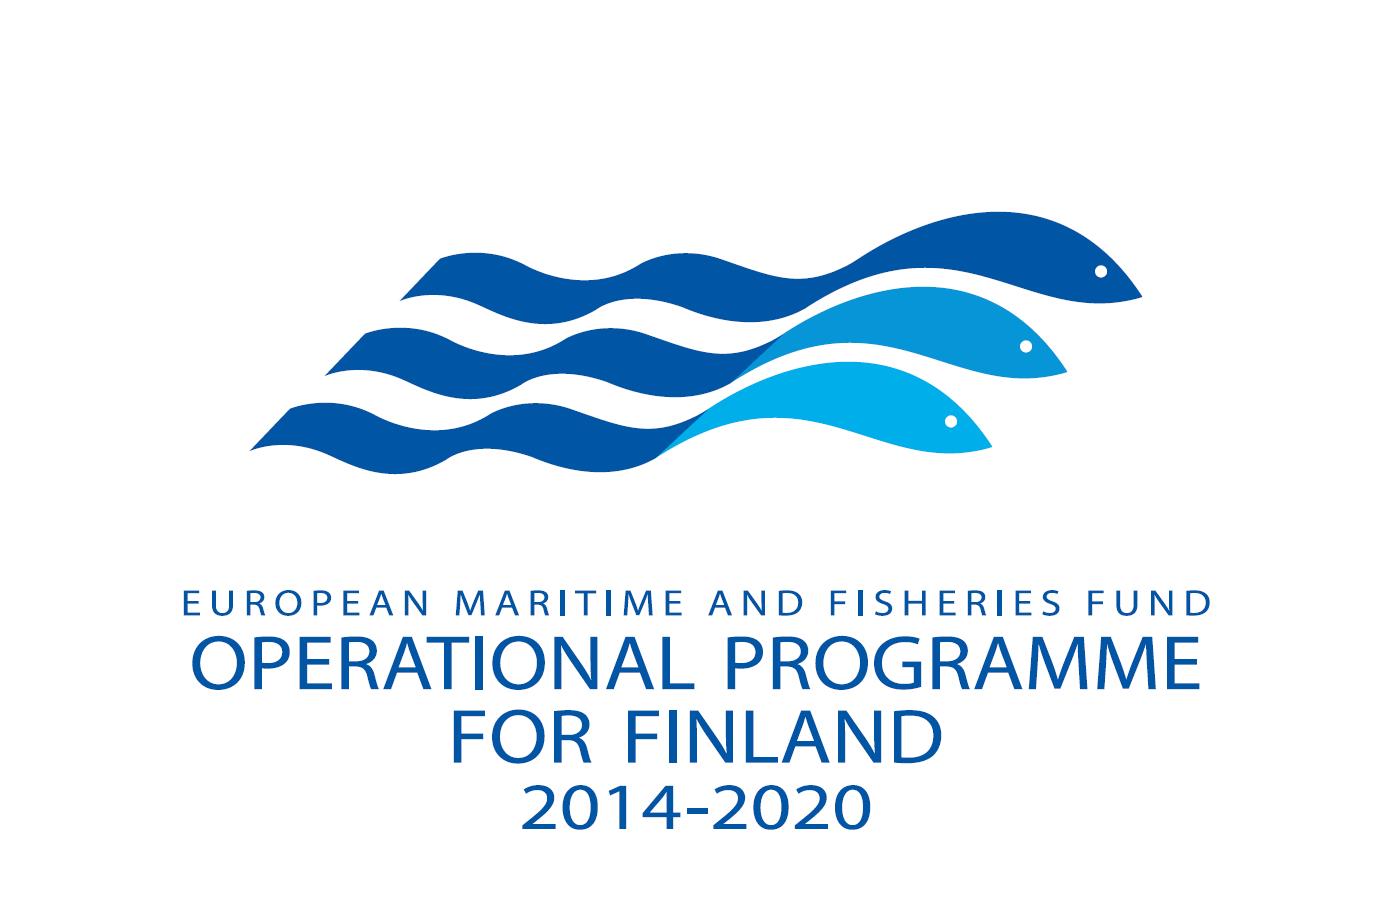 European Maritime and Fisheries Fund Operational Programme for Finland 